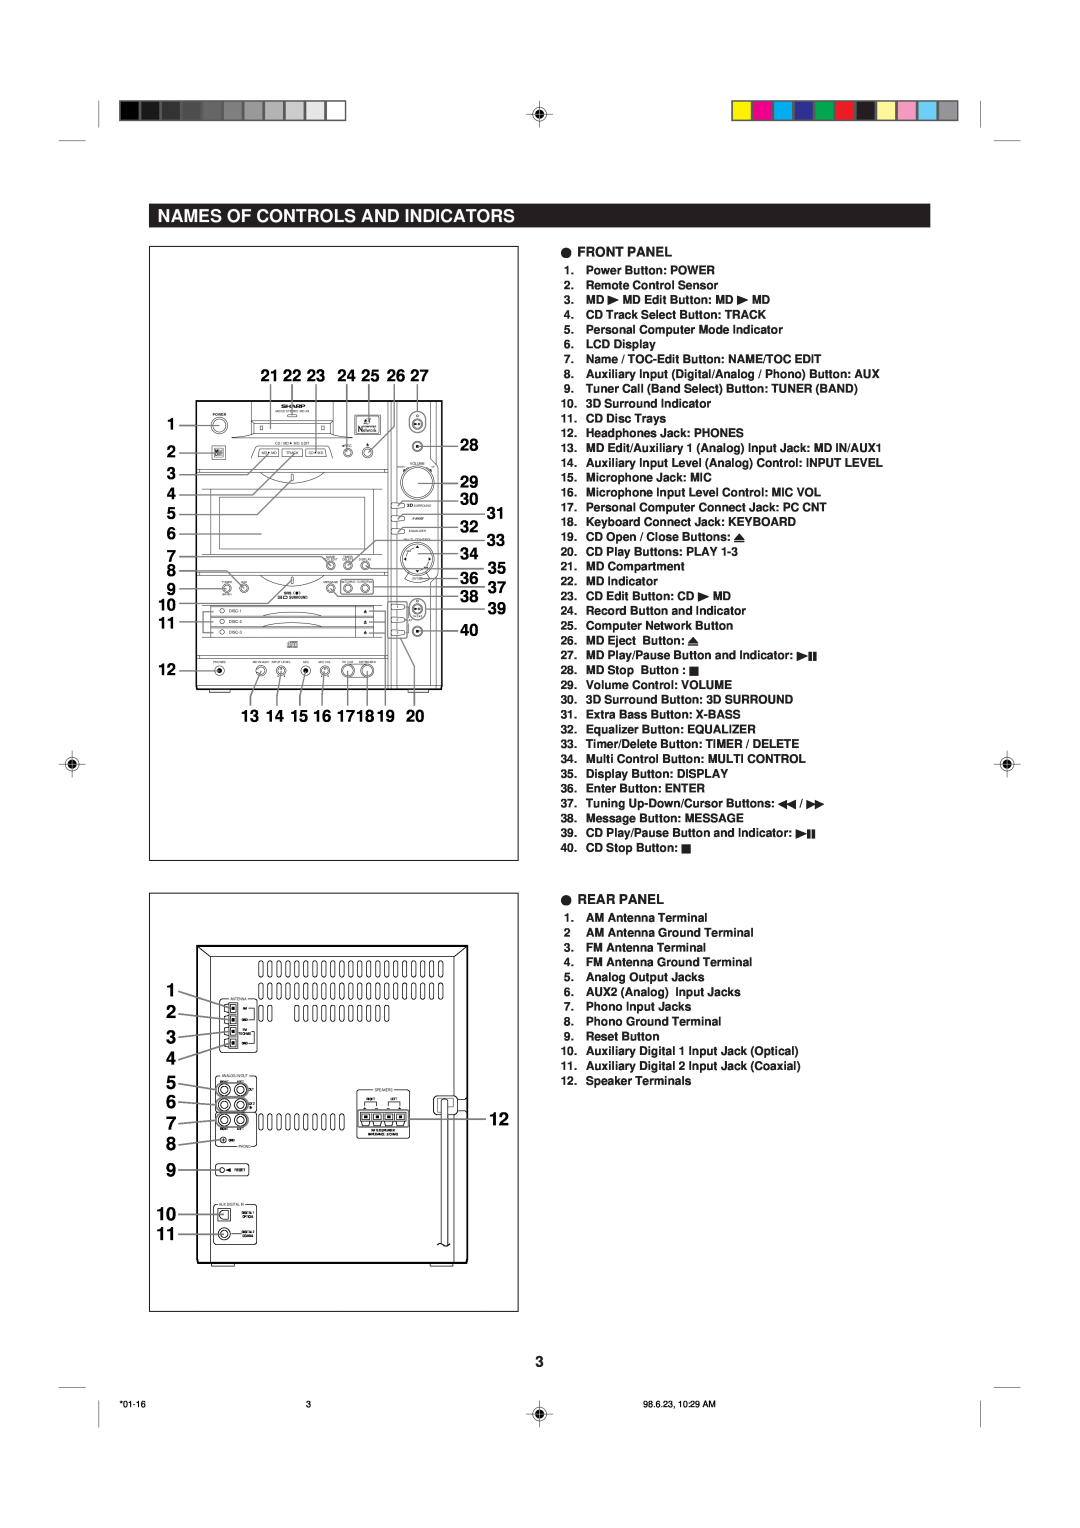 Sharp MD-X8 operation manual Names Of Controls And Indicators, Ifront Panel, Irear Panel 